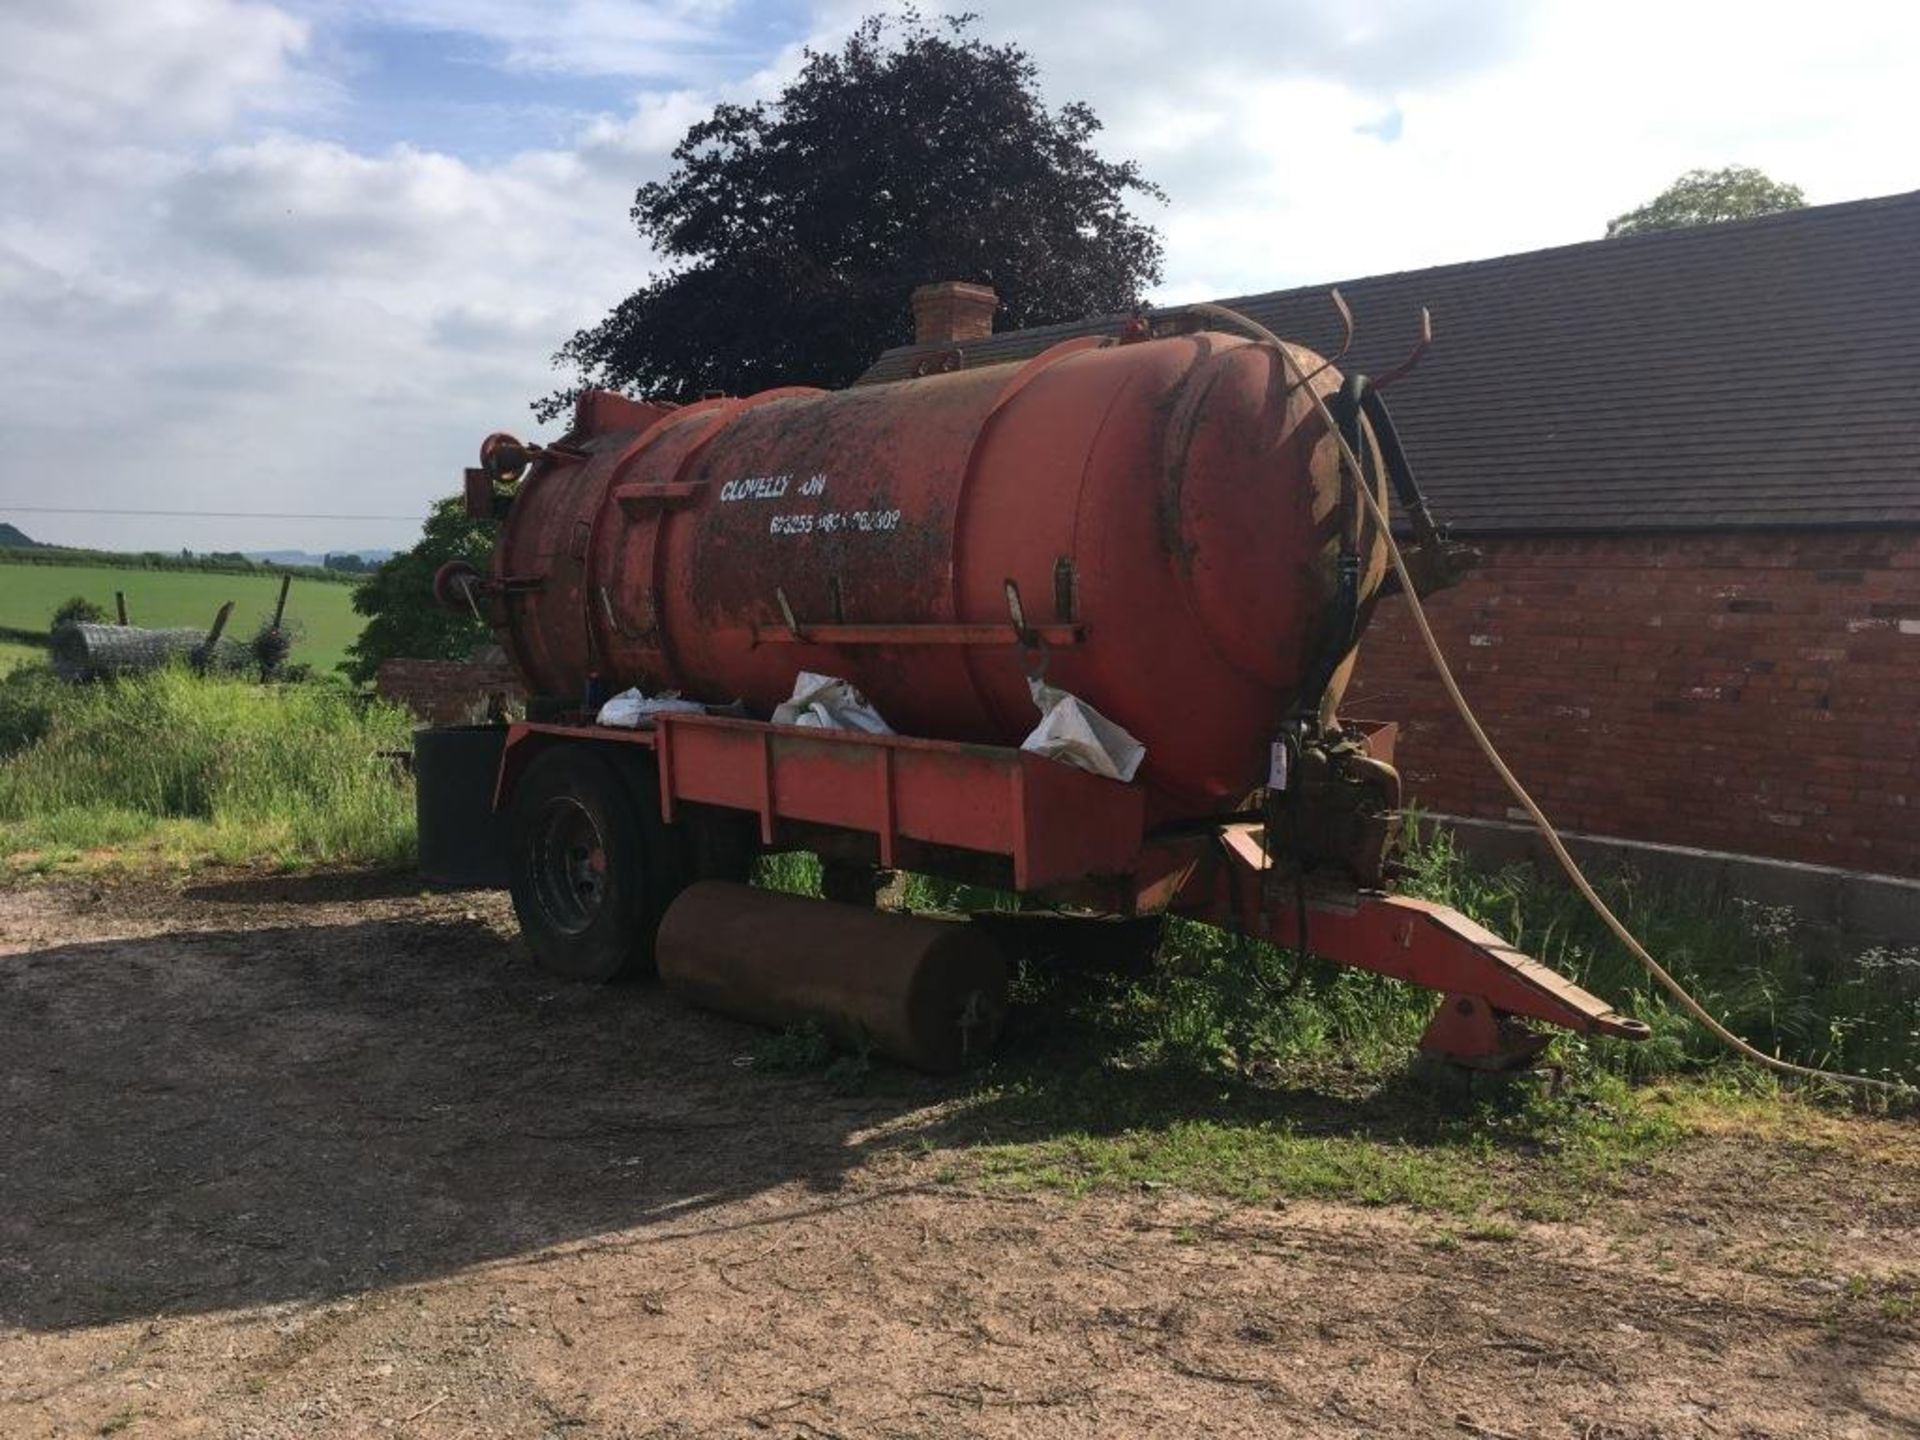 Farm-converted water bowser (ex-slurry tanker) (missing wheel/axle, sold as scrap)